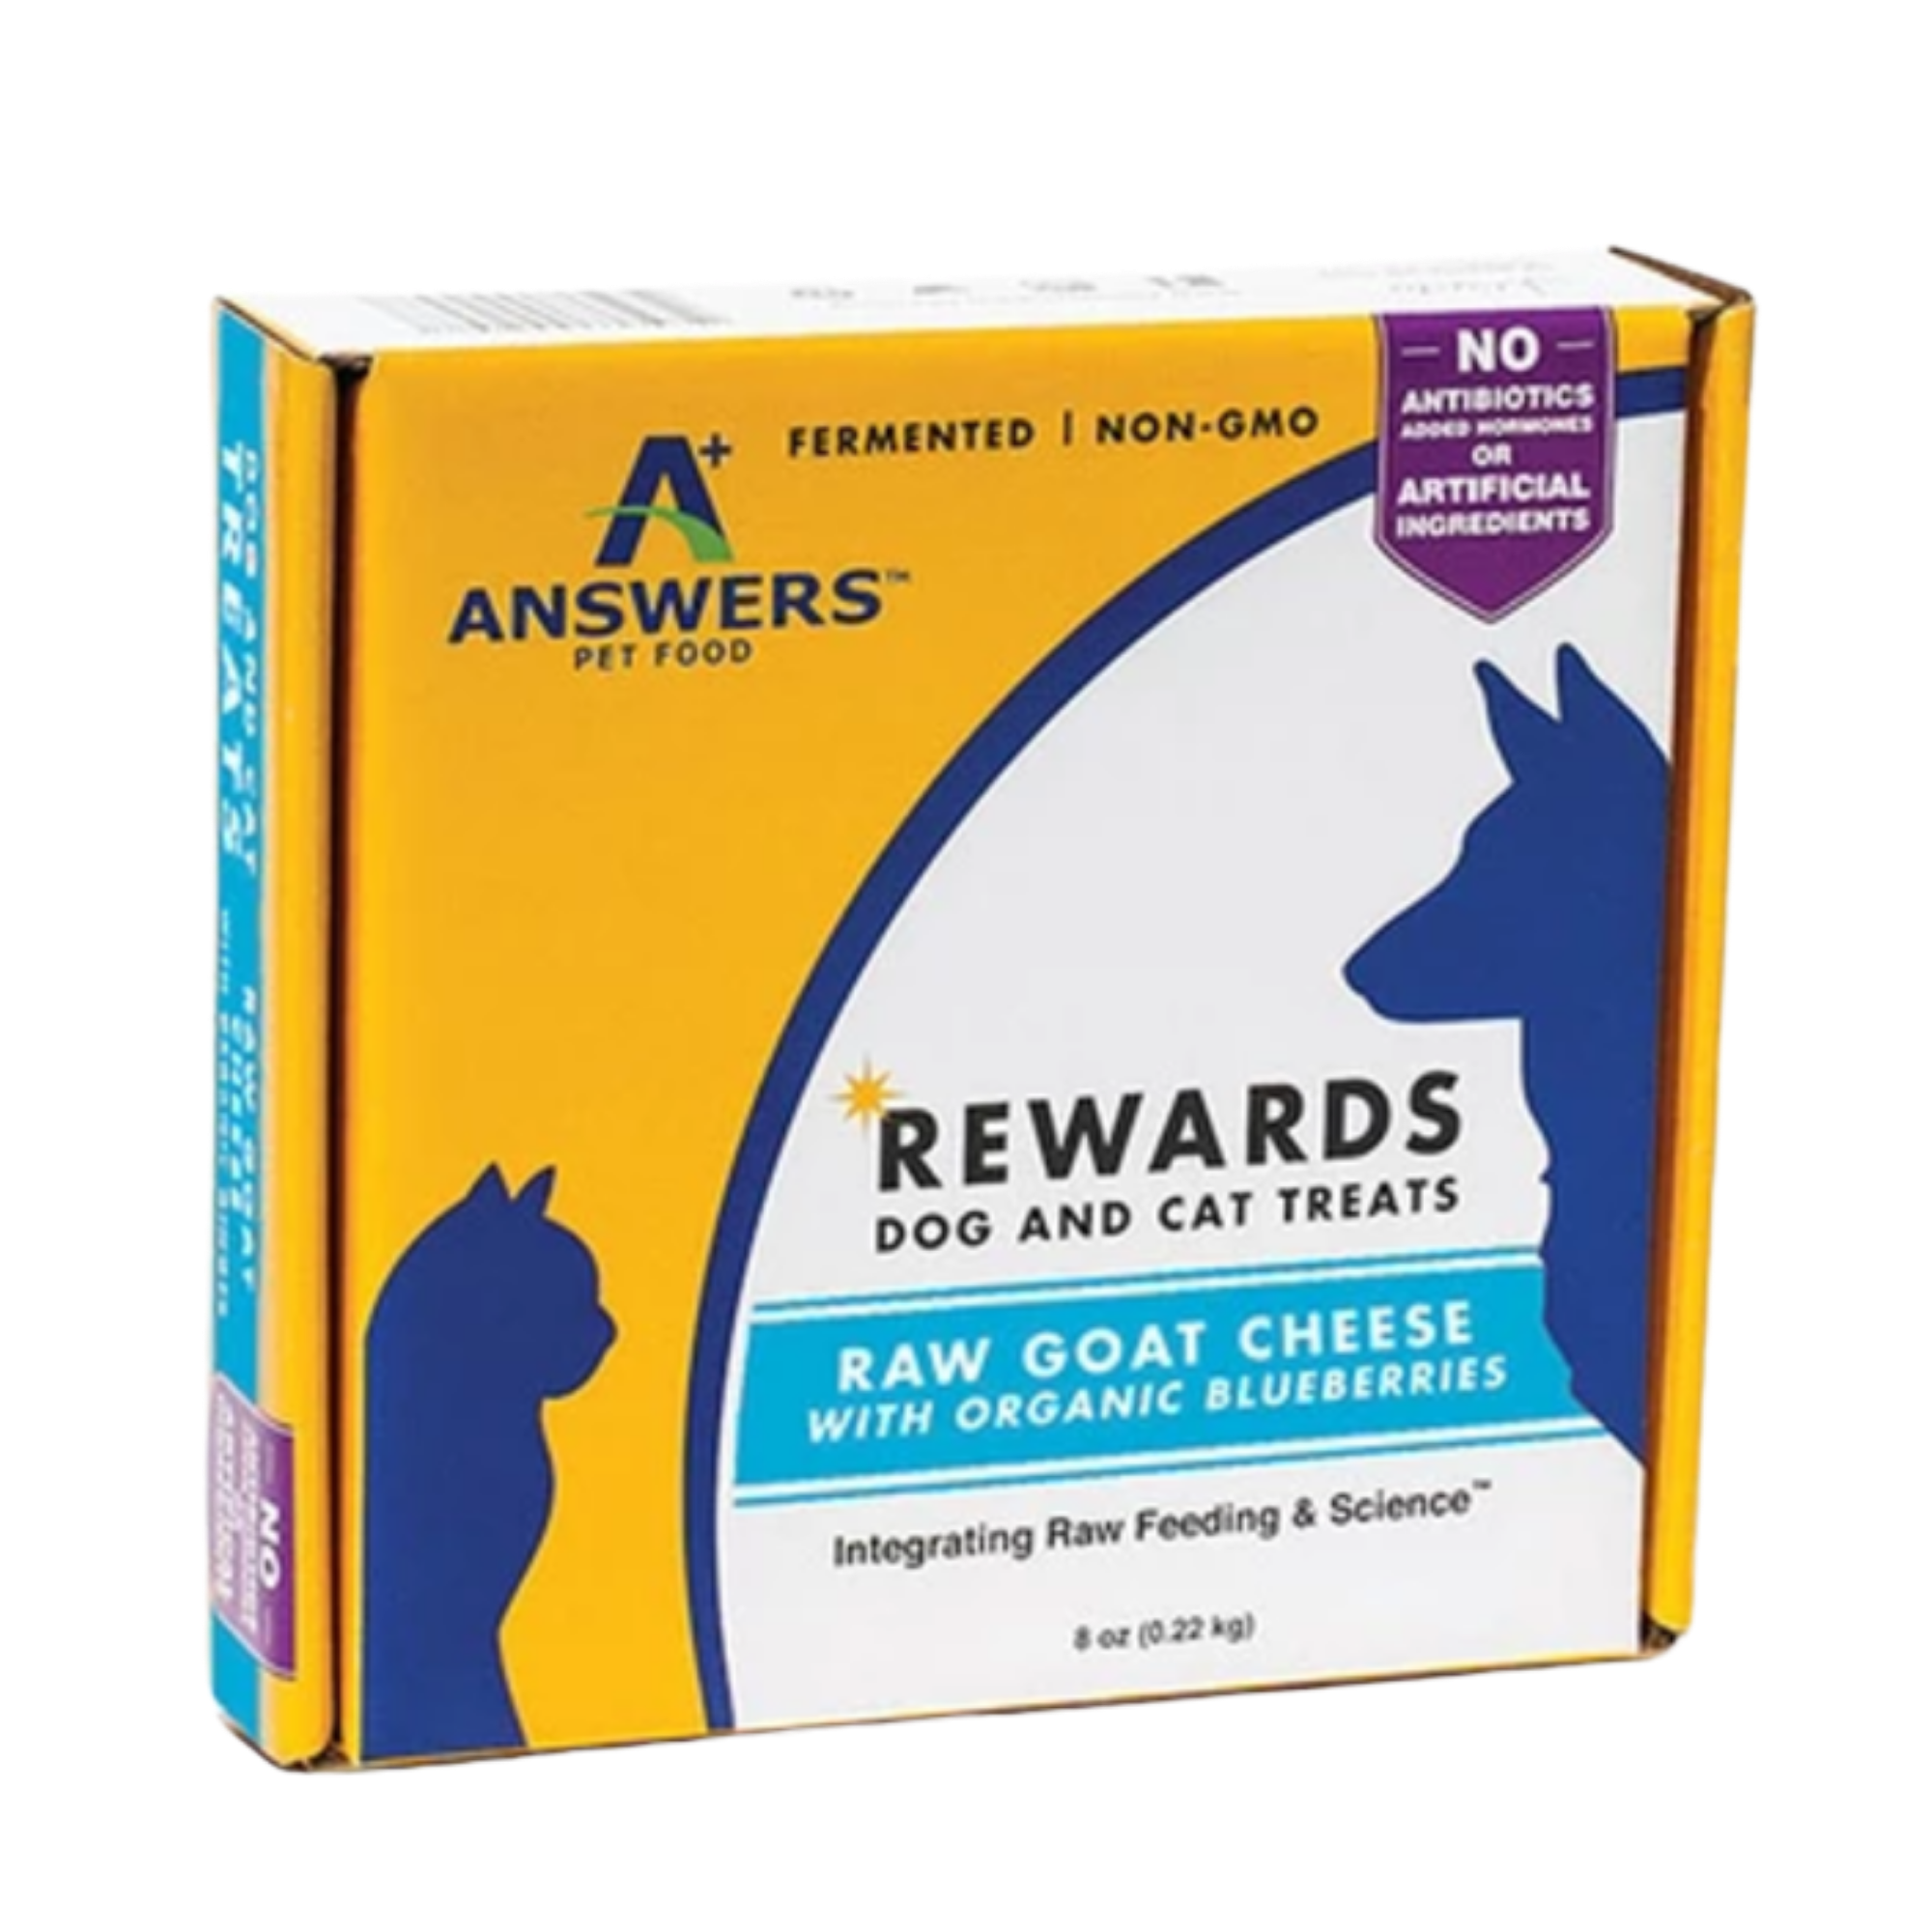 Answers Pet Food Rewards Raw Goat Cheese with Blueberries Treats for Dogs and Cats, 8-oz - Mutts & Co.